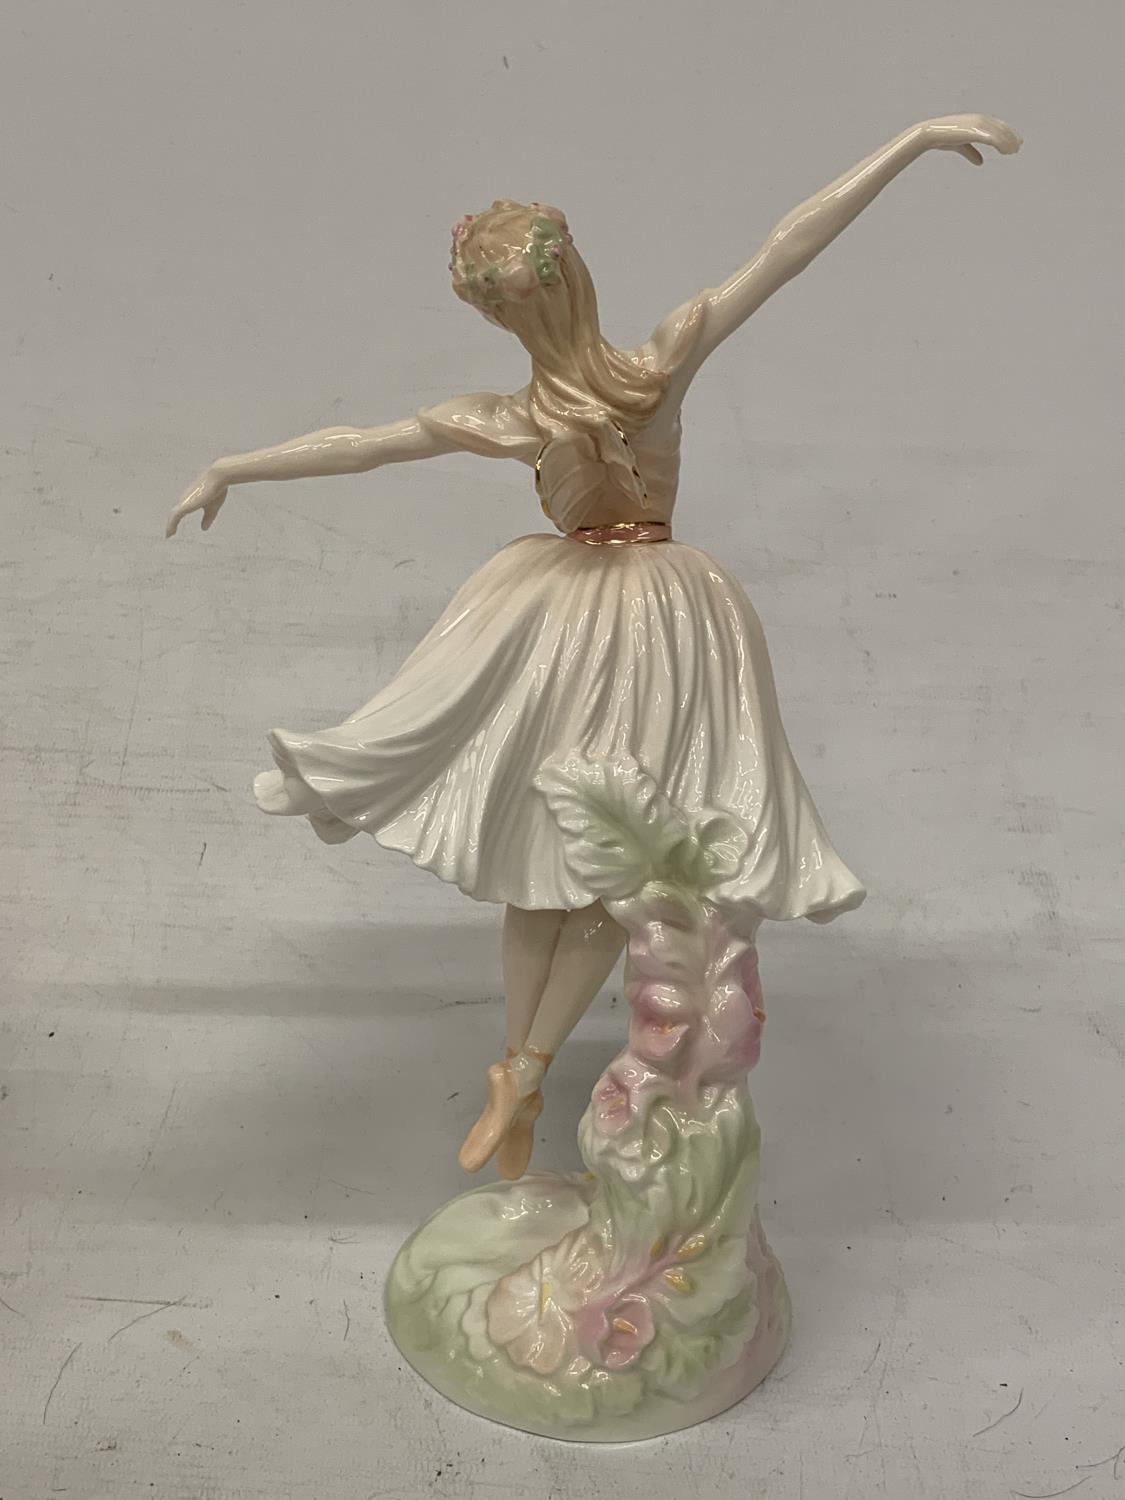 A COALPORT FIGURINE "DAME ANTOINETTE SIBLEY" FROM THE ROYAL ACADEMY OF DANCING COLLECTION - Image 3 of 5